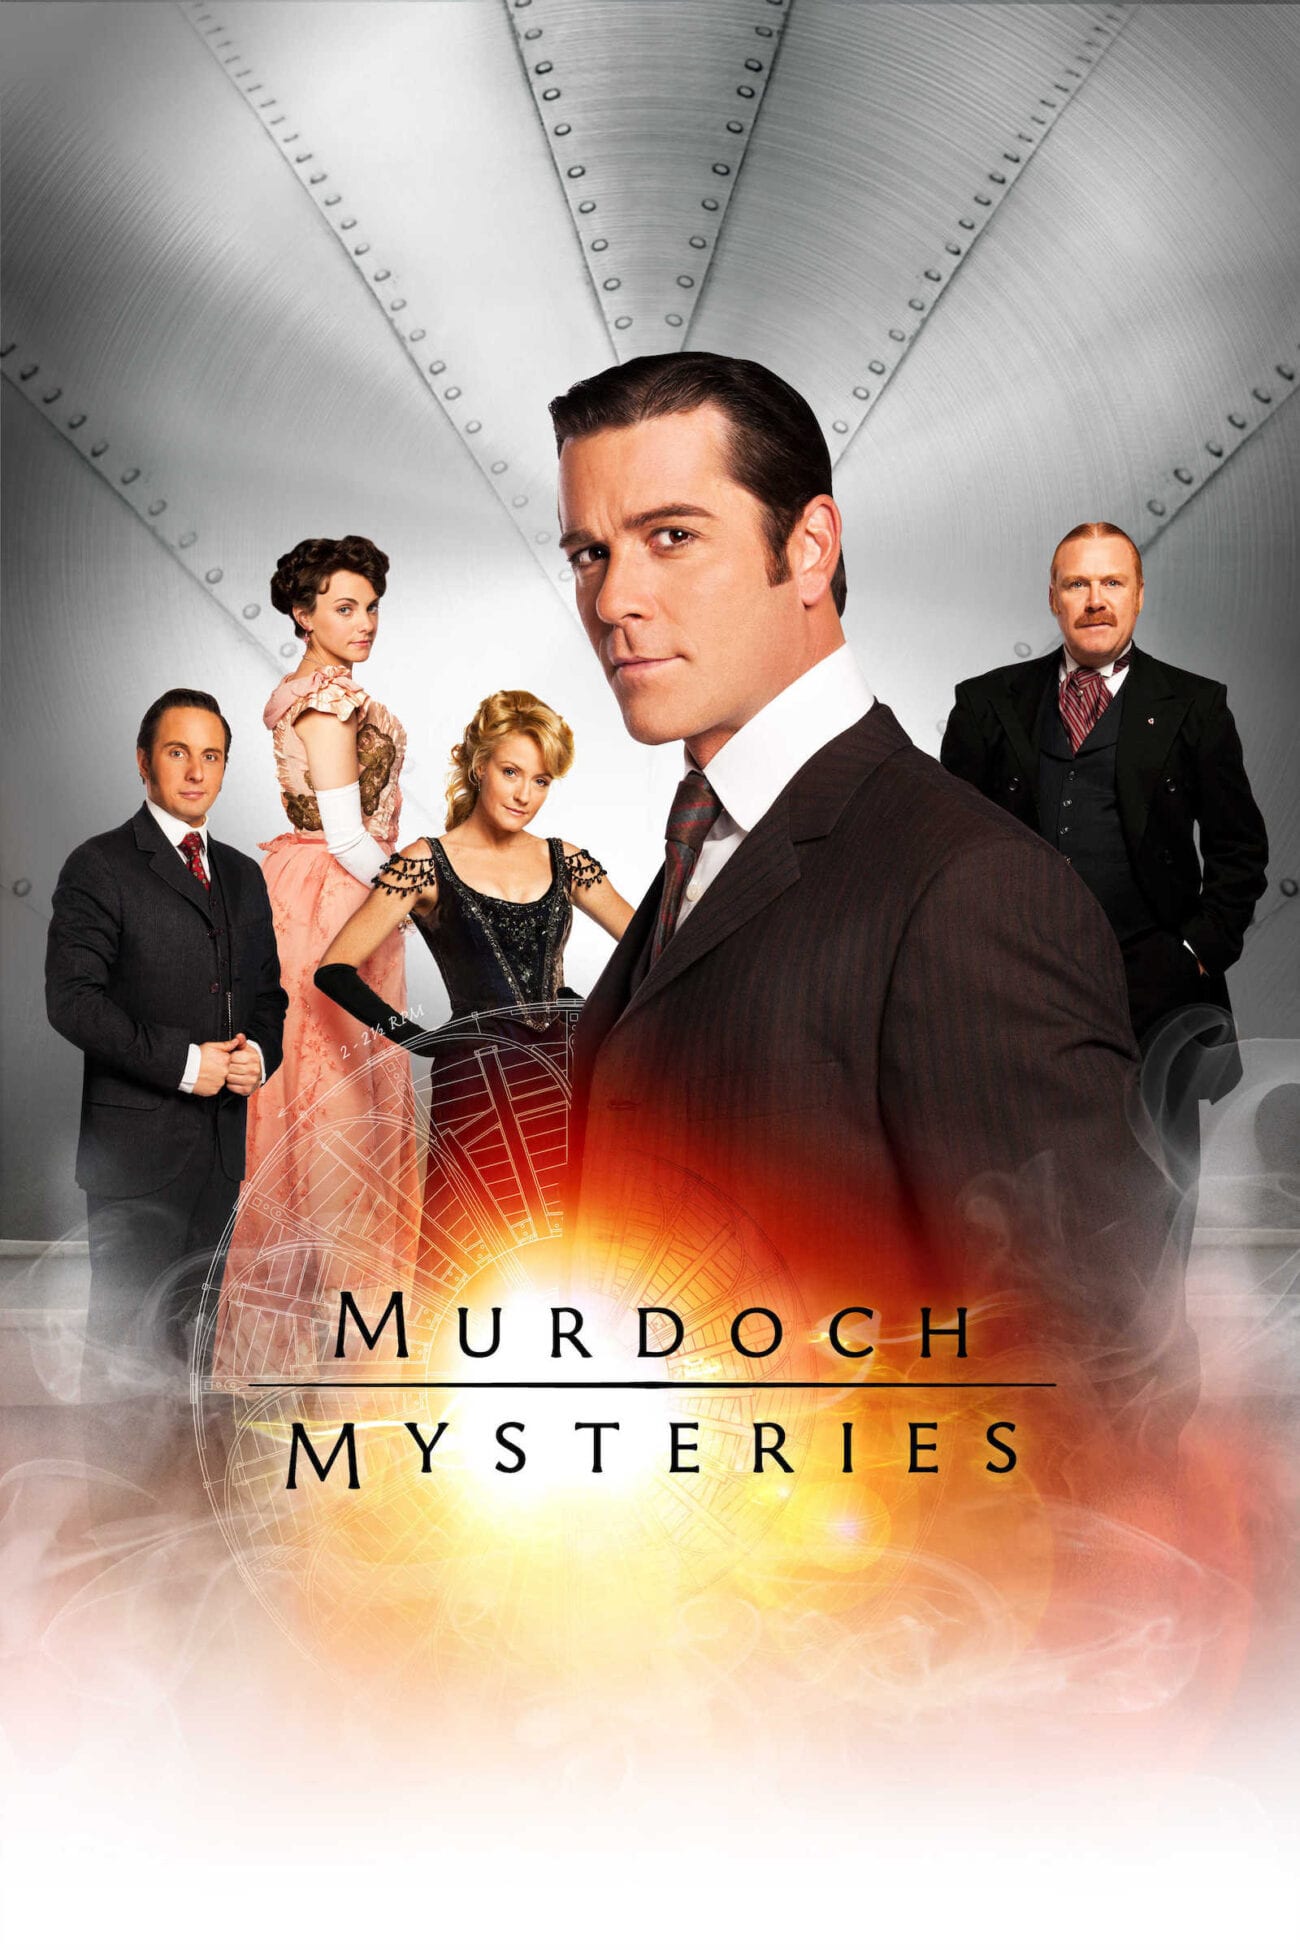 Do you love watching procedural crime dramas? Well, take a break from your modern day shows and watch 'Murdoch Mysteries'. Here's why.